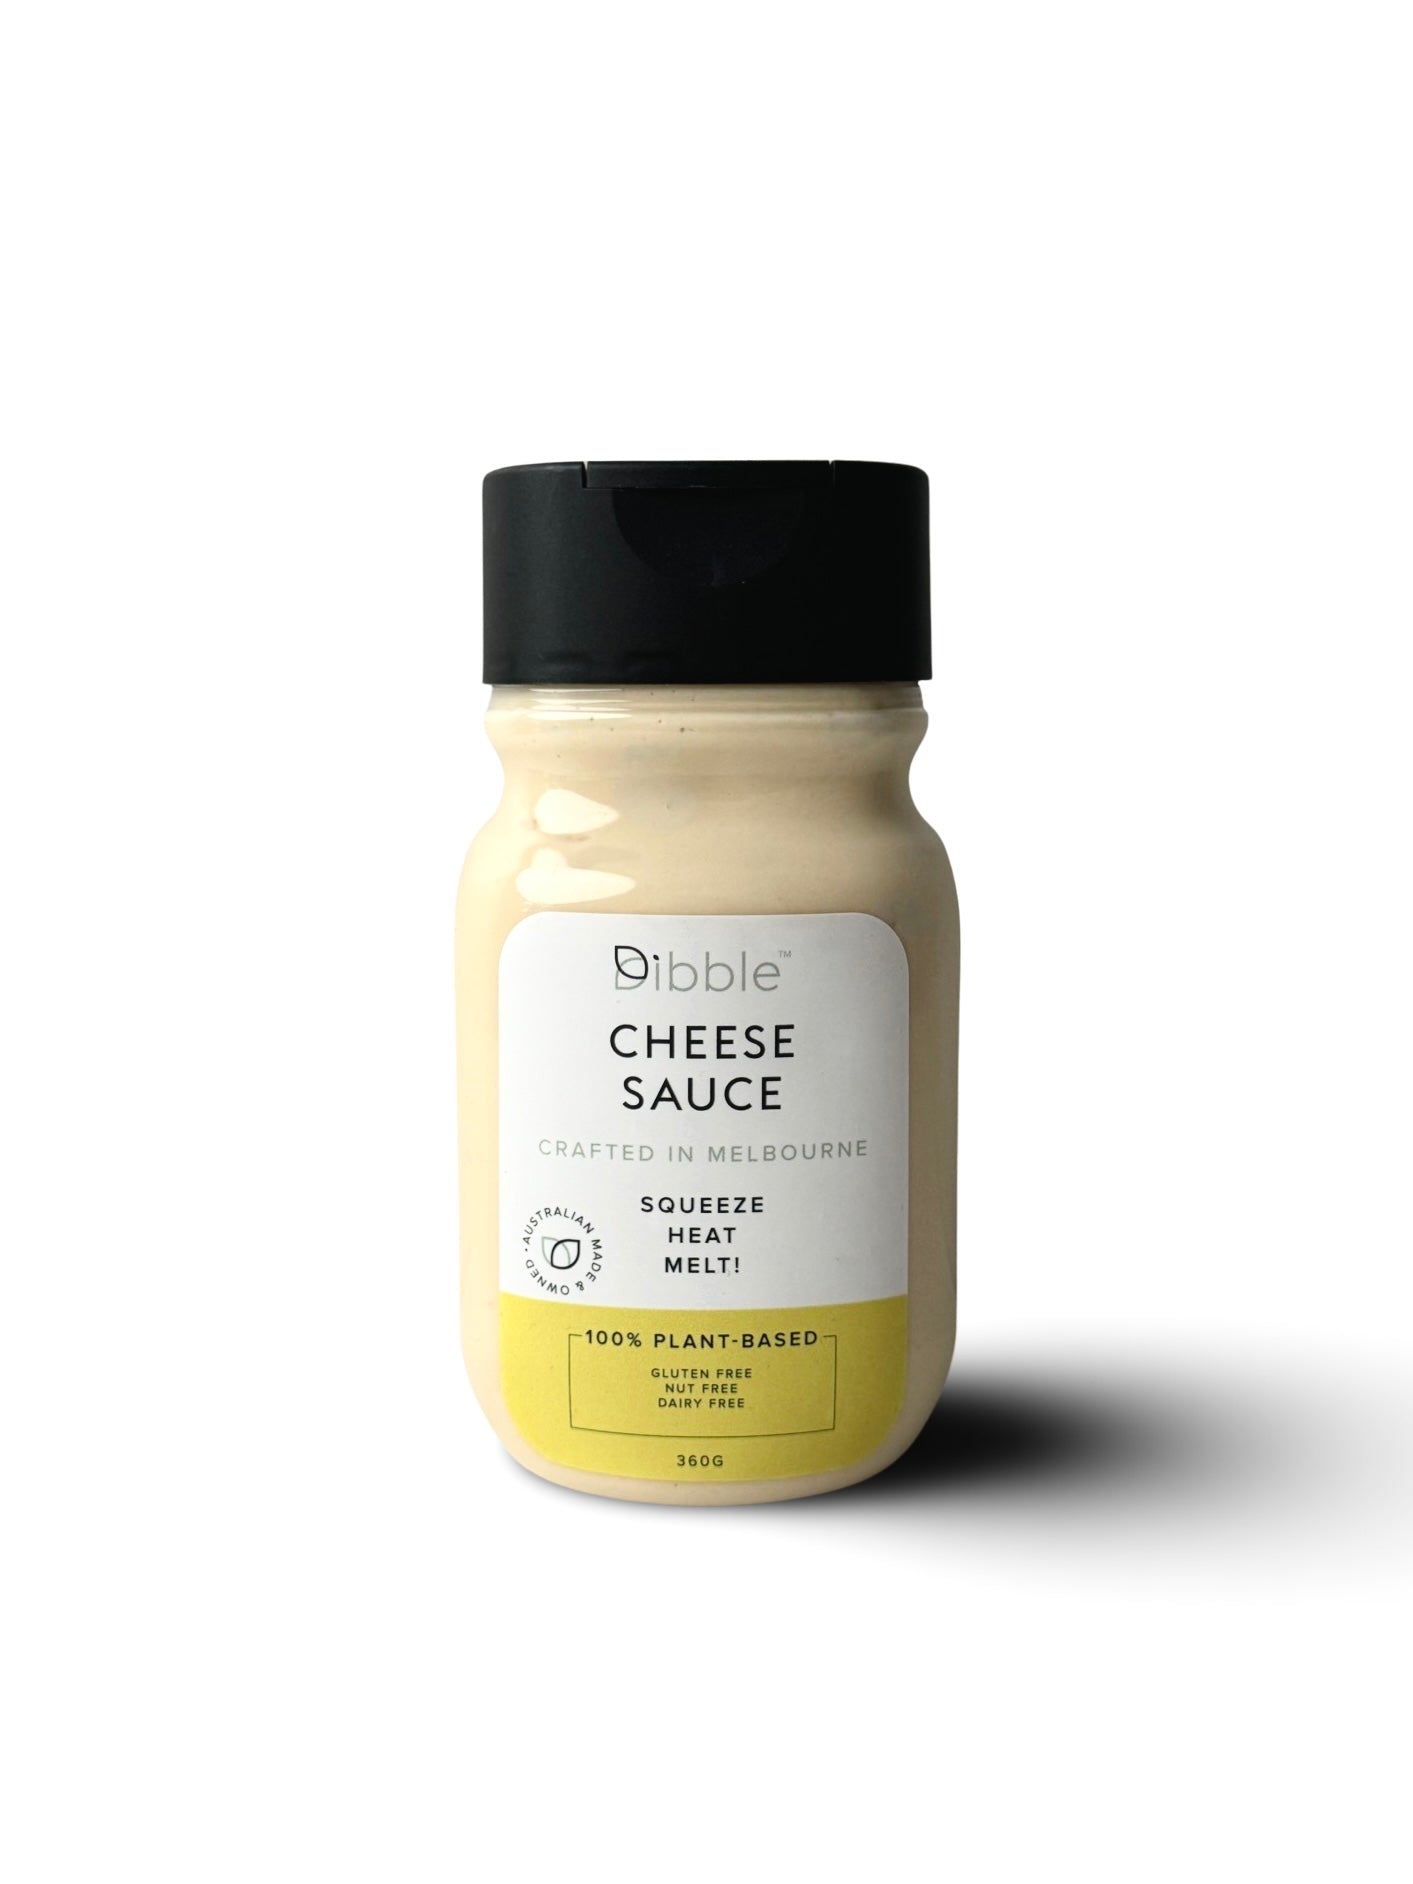 Dibble vegan cheese sauce that easily melts when heated